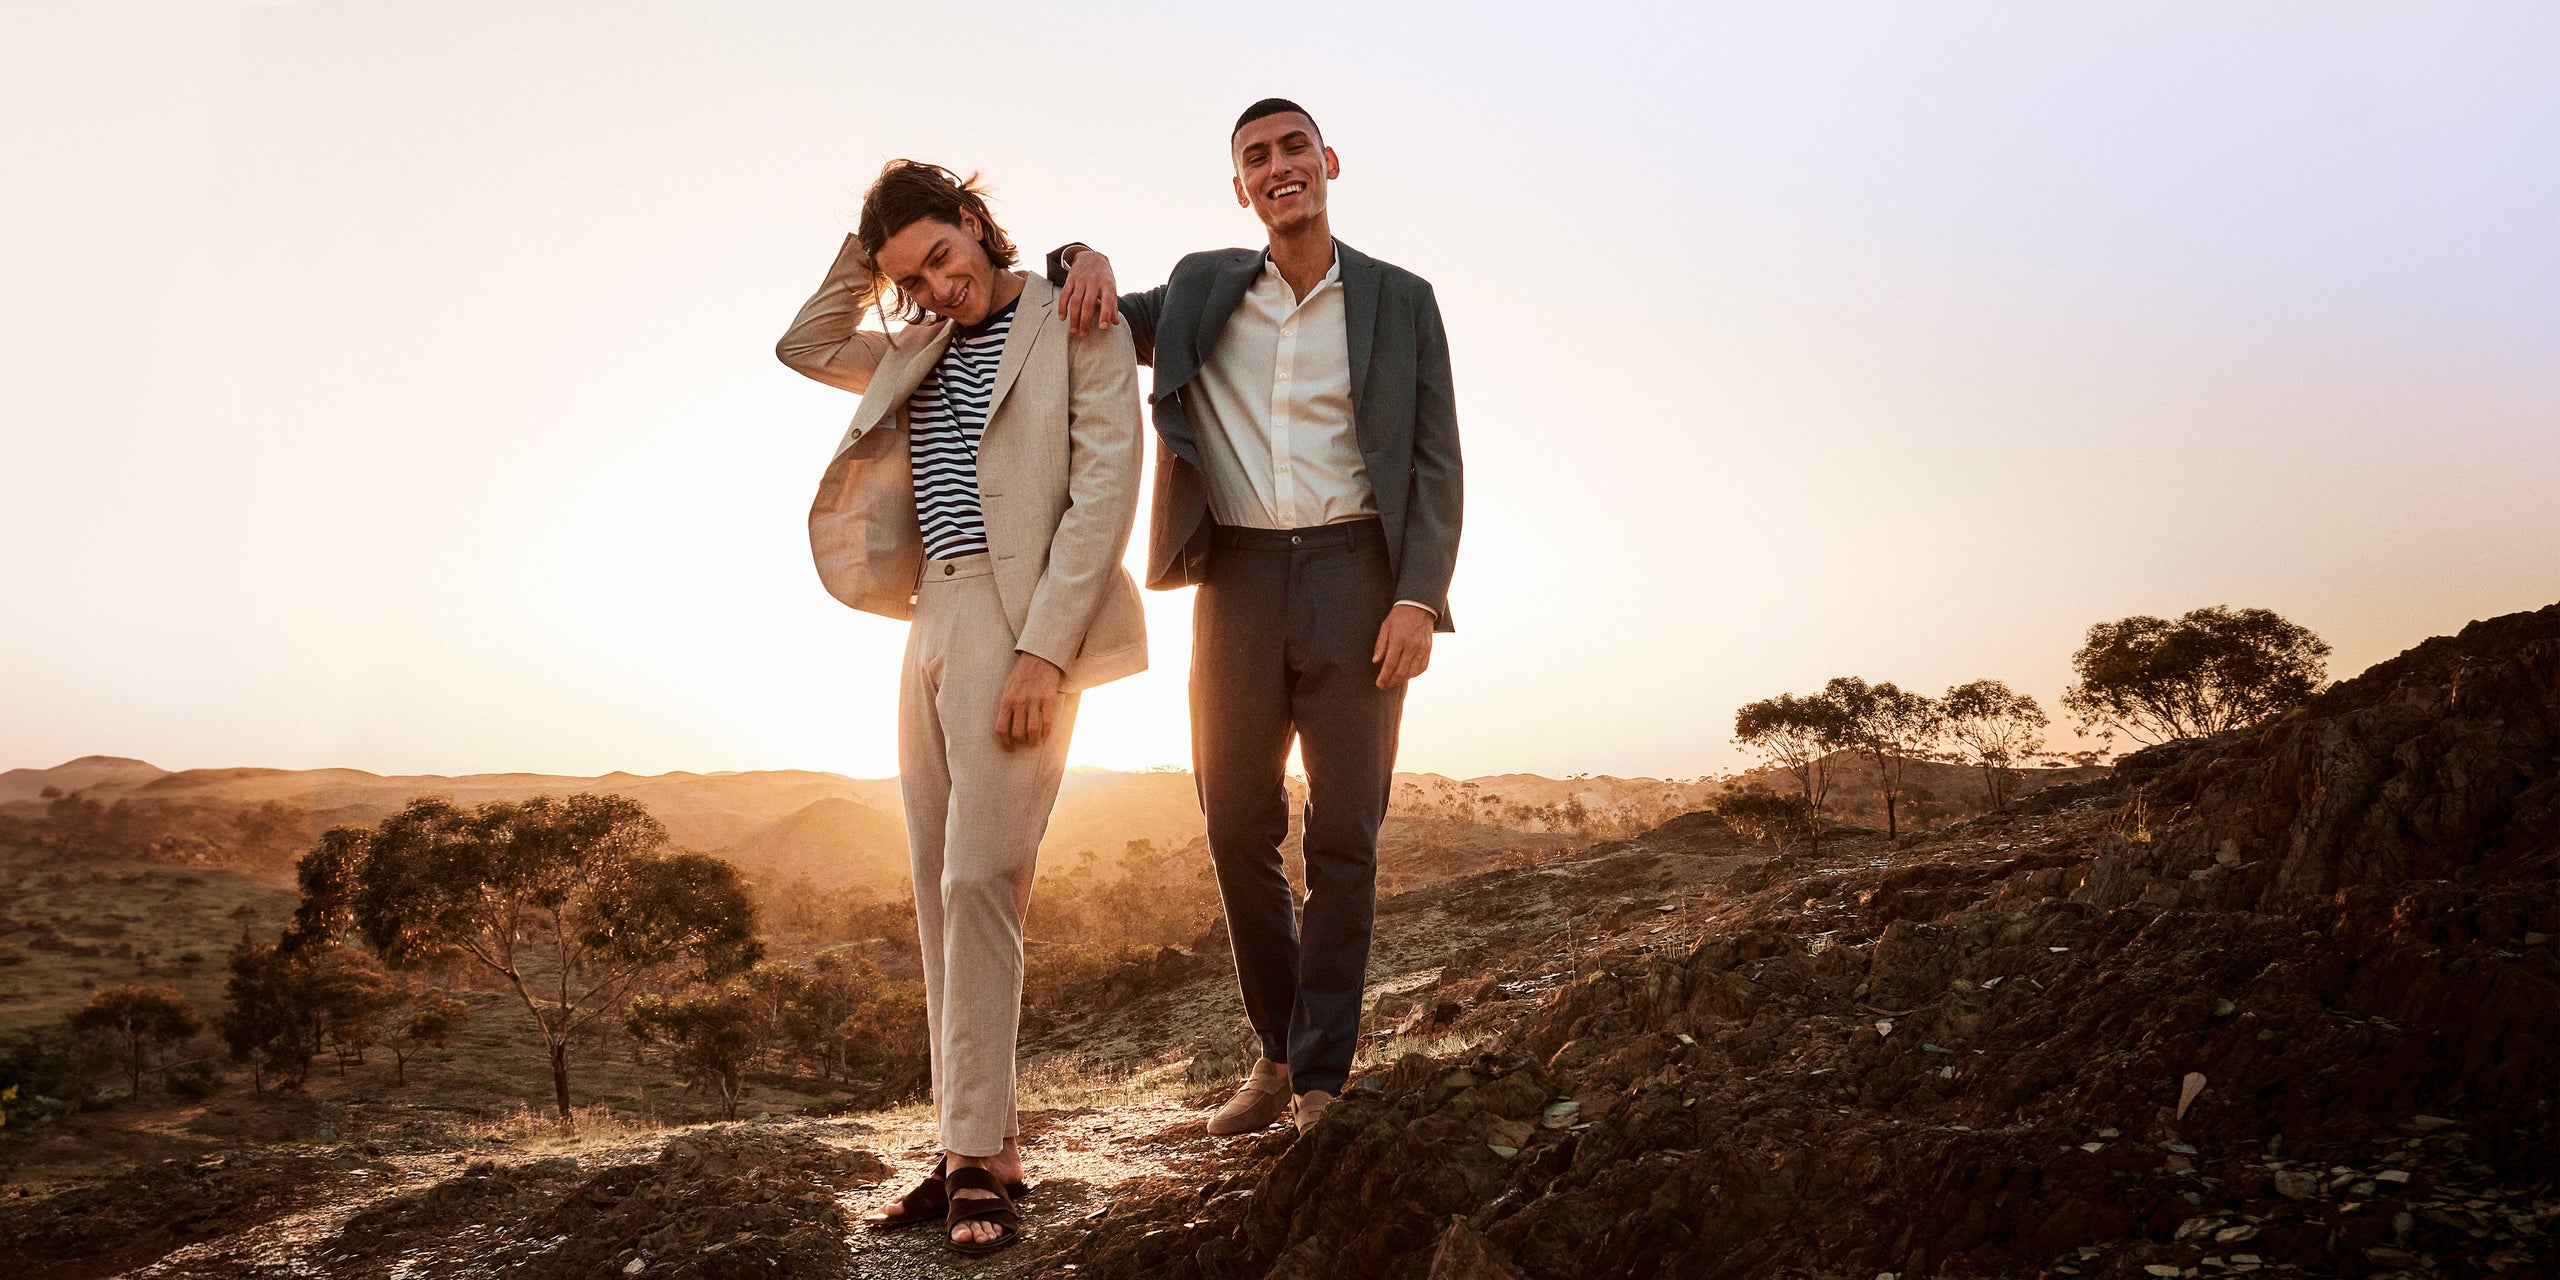 Two male models standing in a desert wearing a beige suit and grey suit looking happy